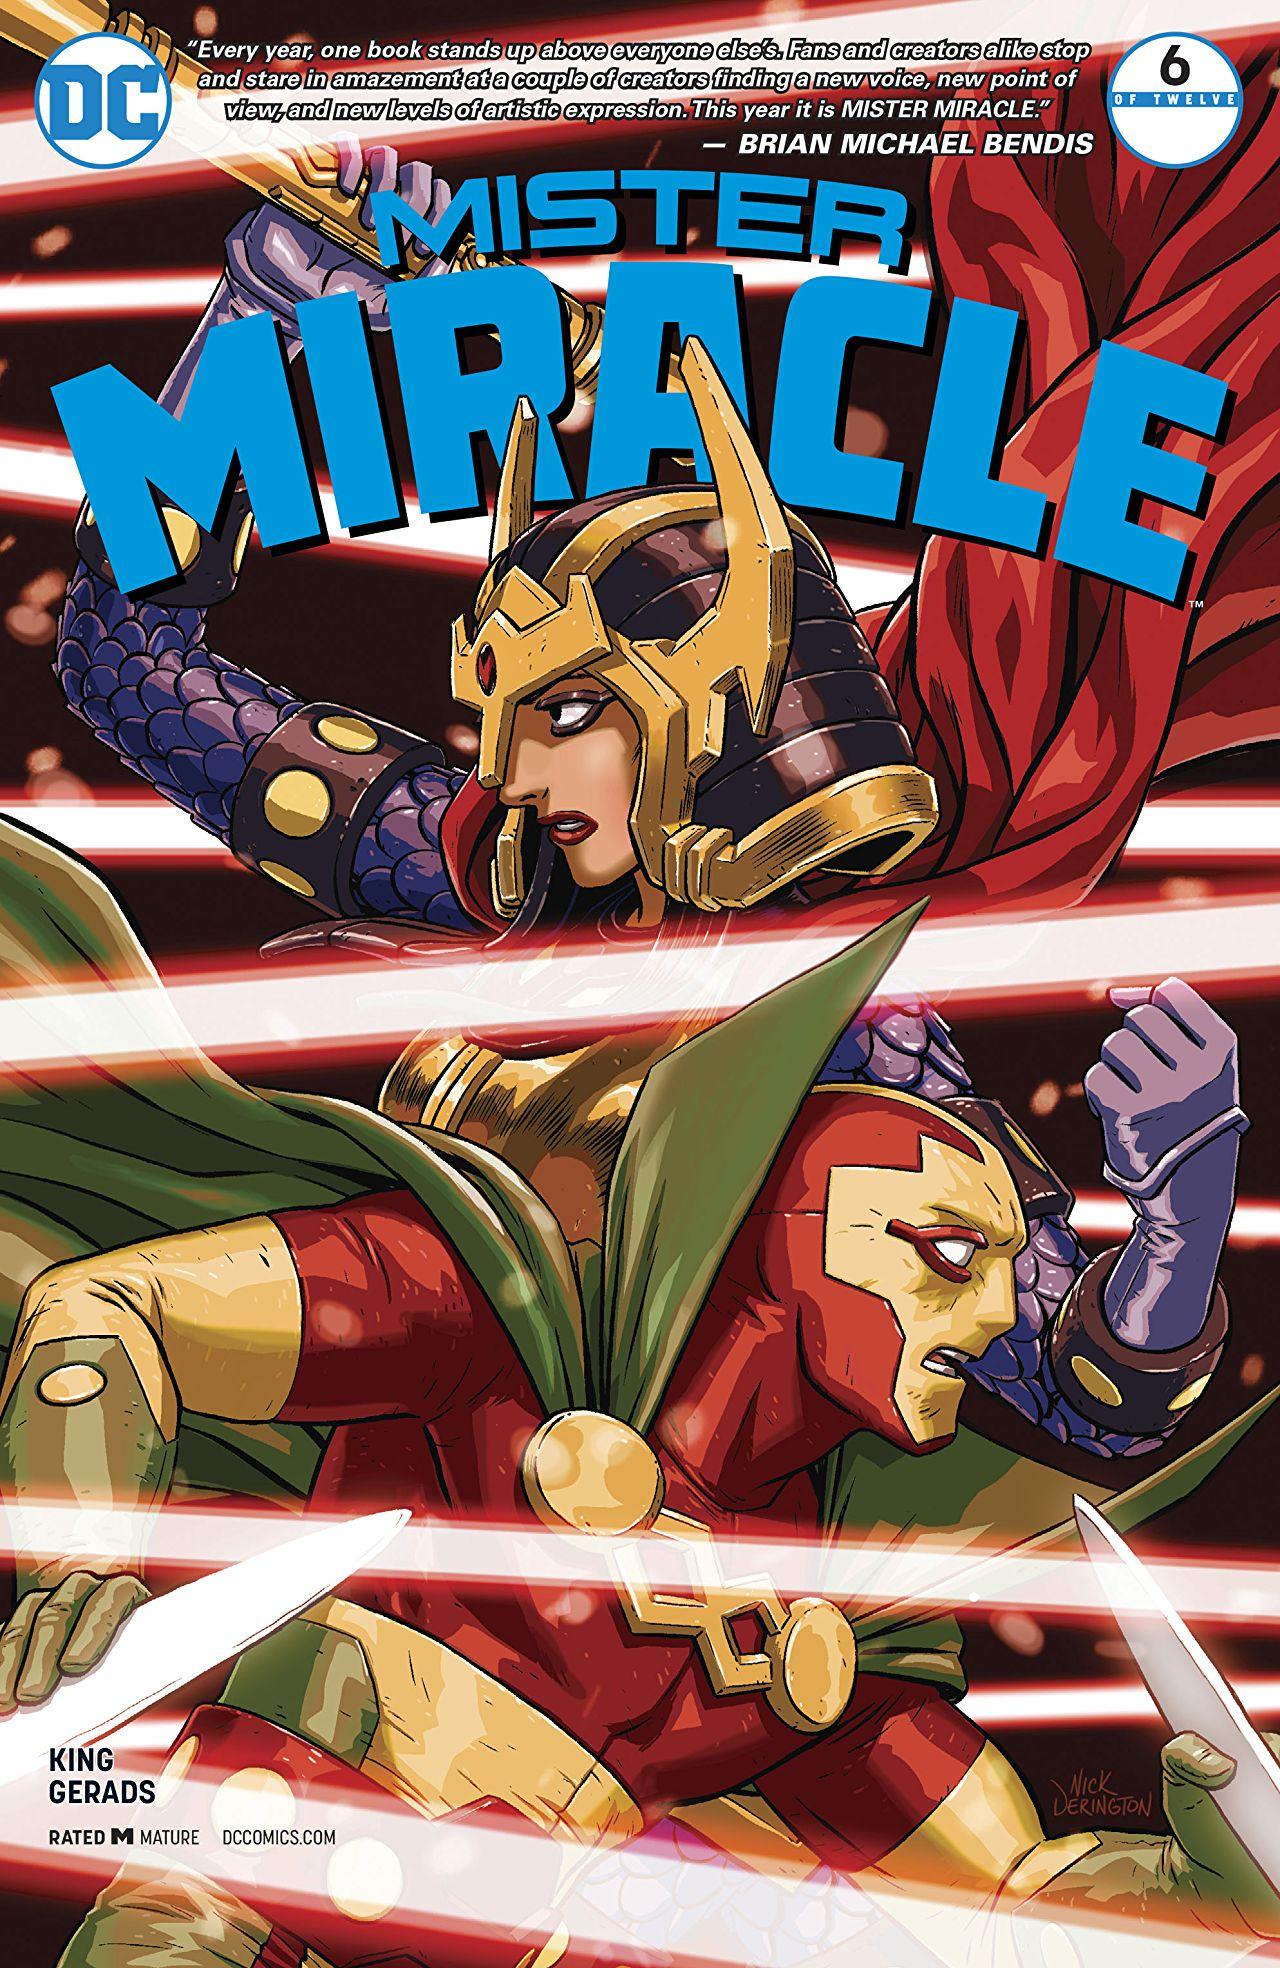 Mister Miracle Vol. 4 #6